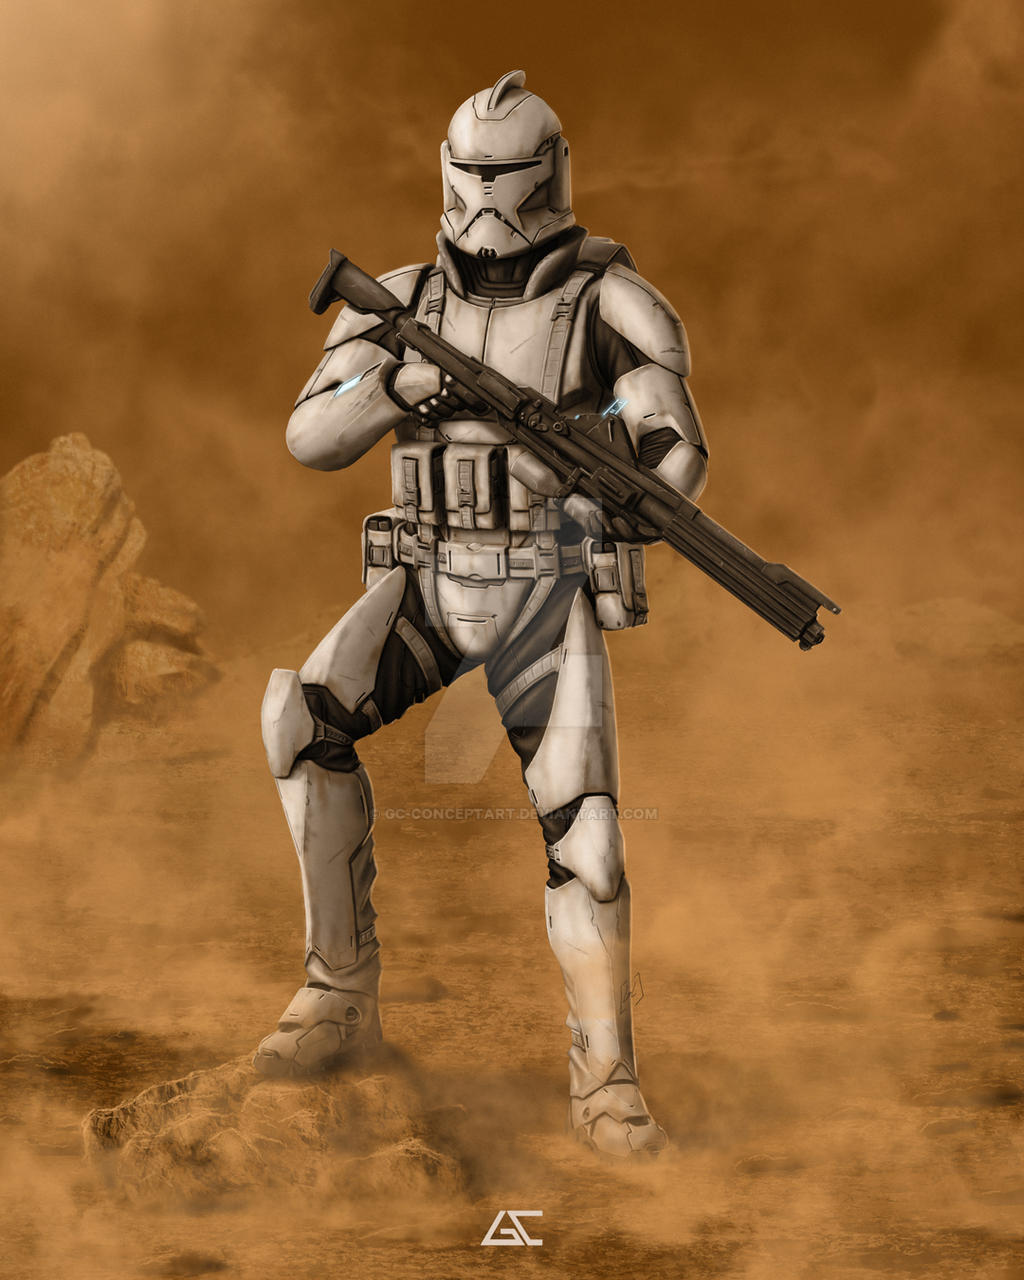 star_wars___clone_redesign_by_gc_conceptart_dfy398i-fullview.jpg